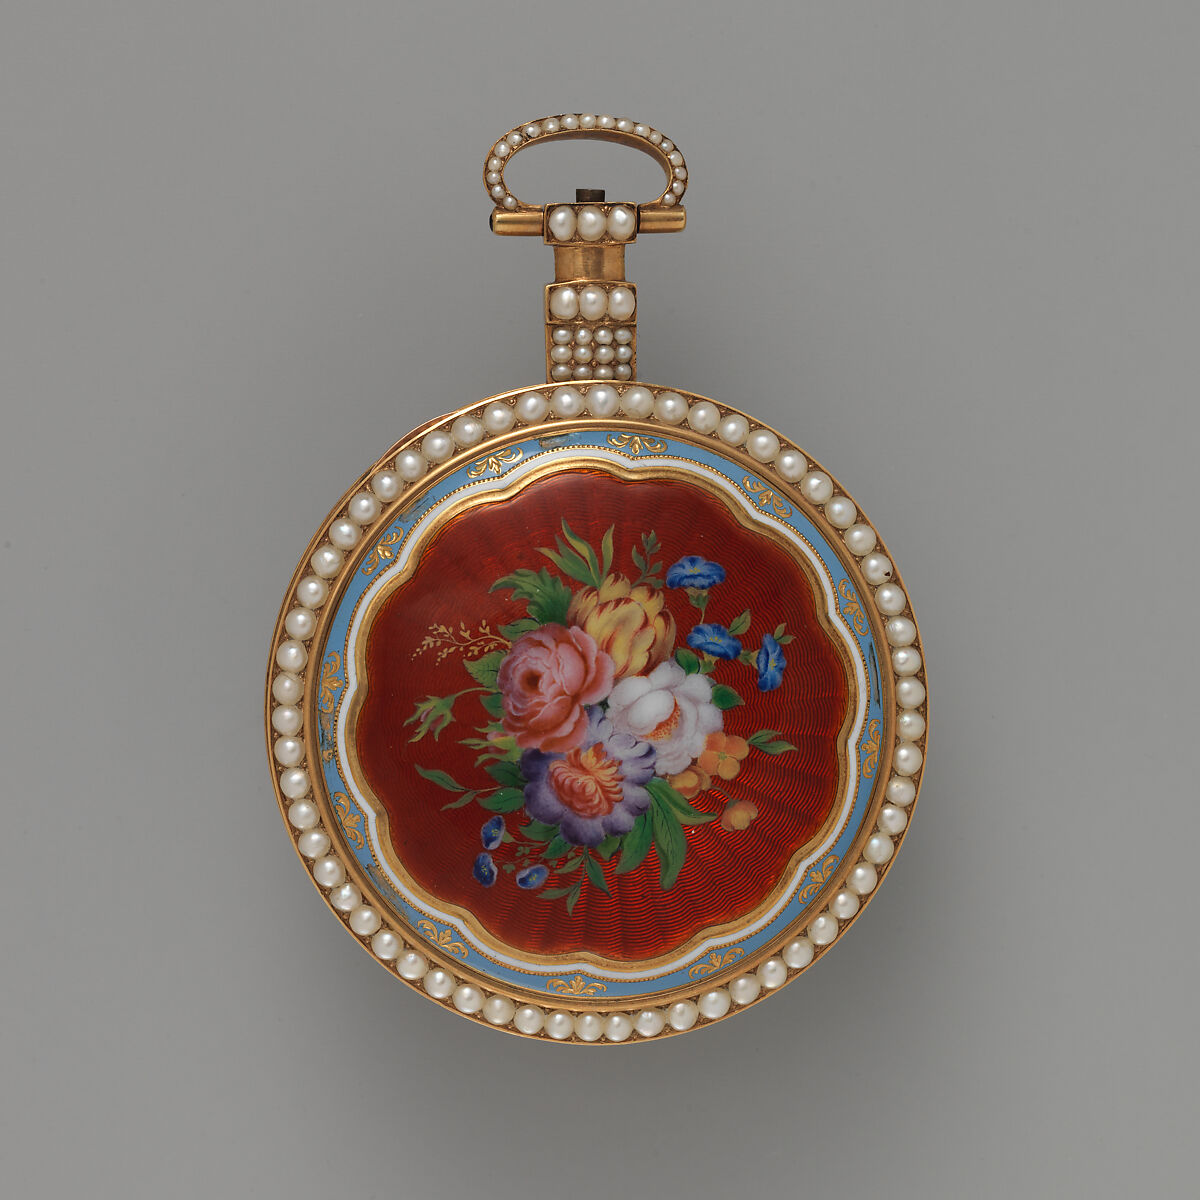 Watch, Watchmaker: Grayhurst, Harvey &amp; Co. (recorded 1805–30), Case of gold, enamel, and pearls, with floral design; jeweled movement, with ruby cylinder escapement, British, London 